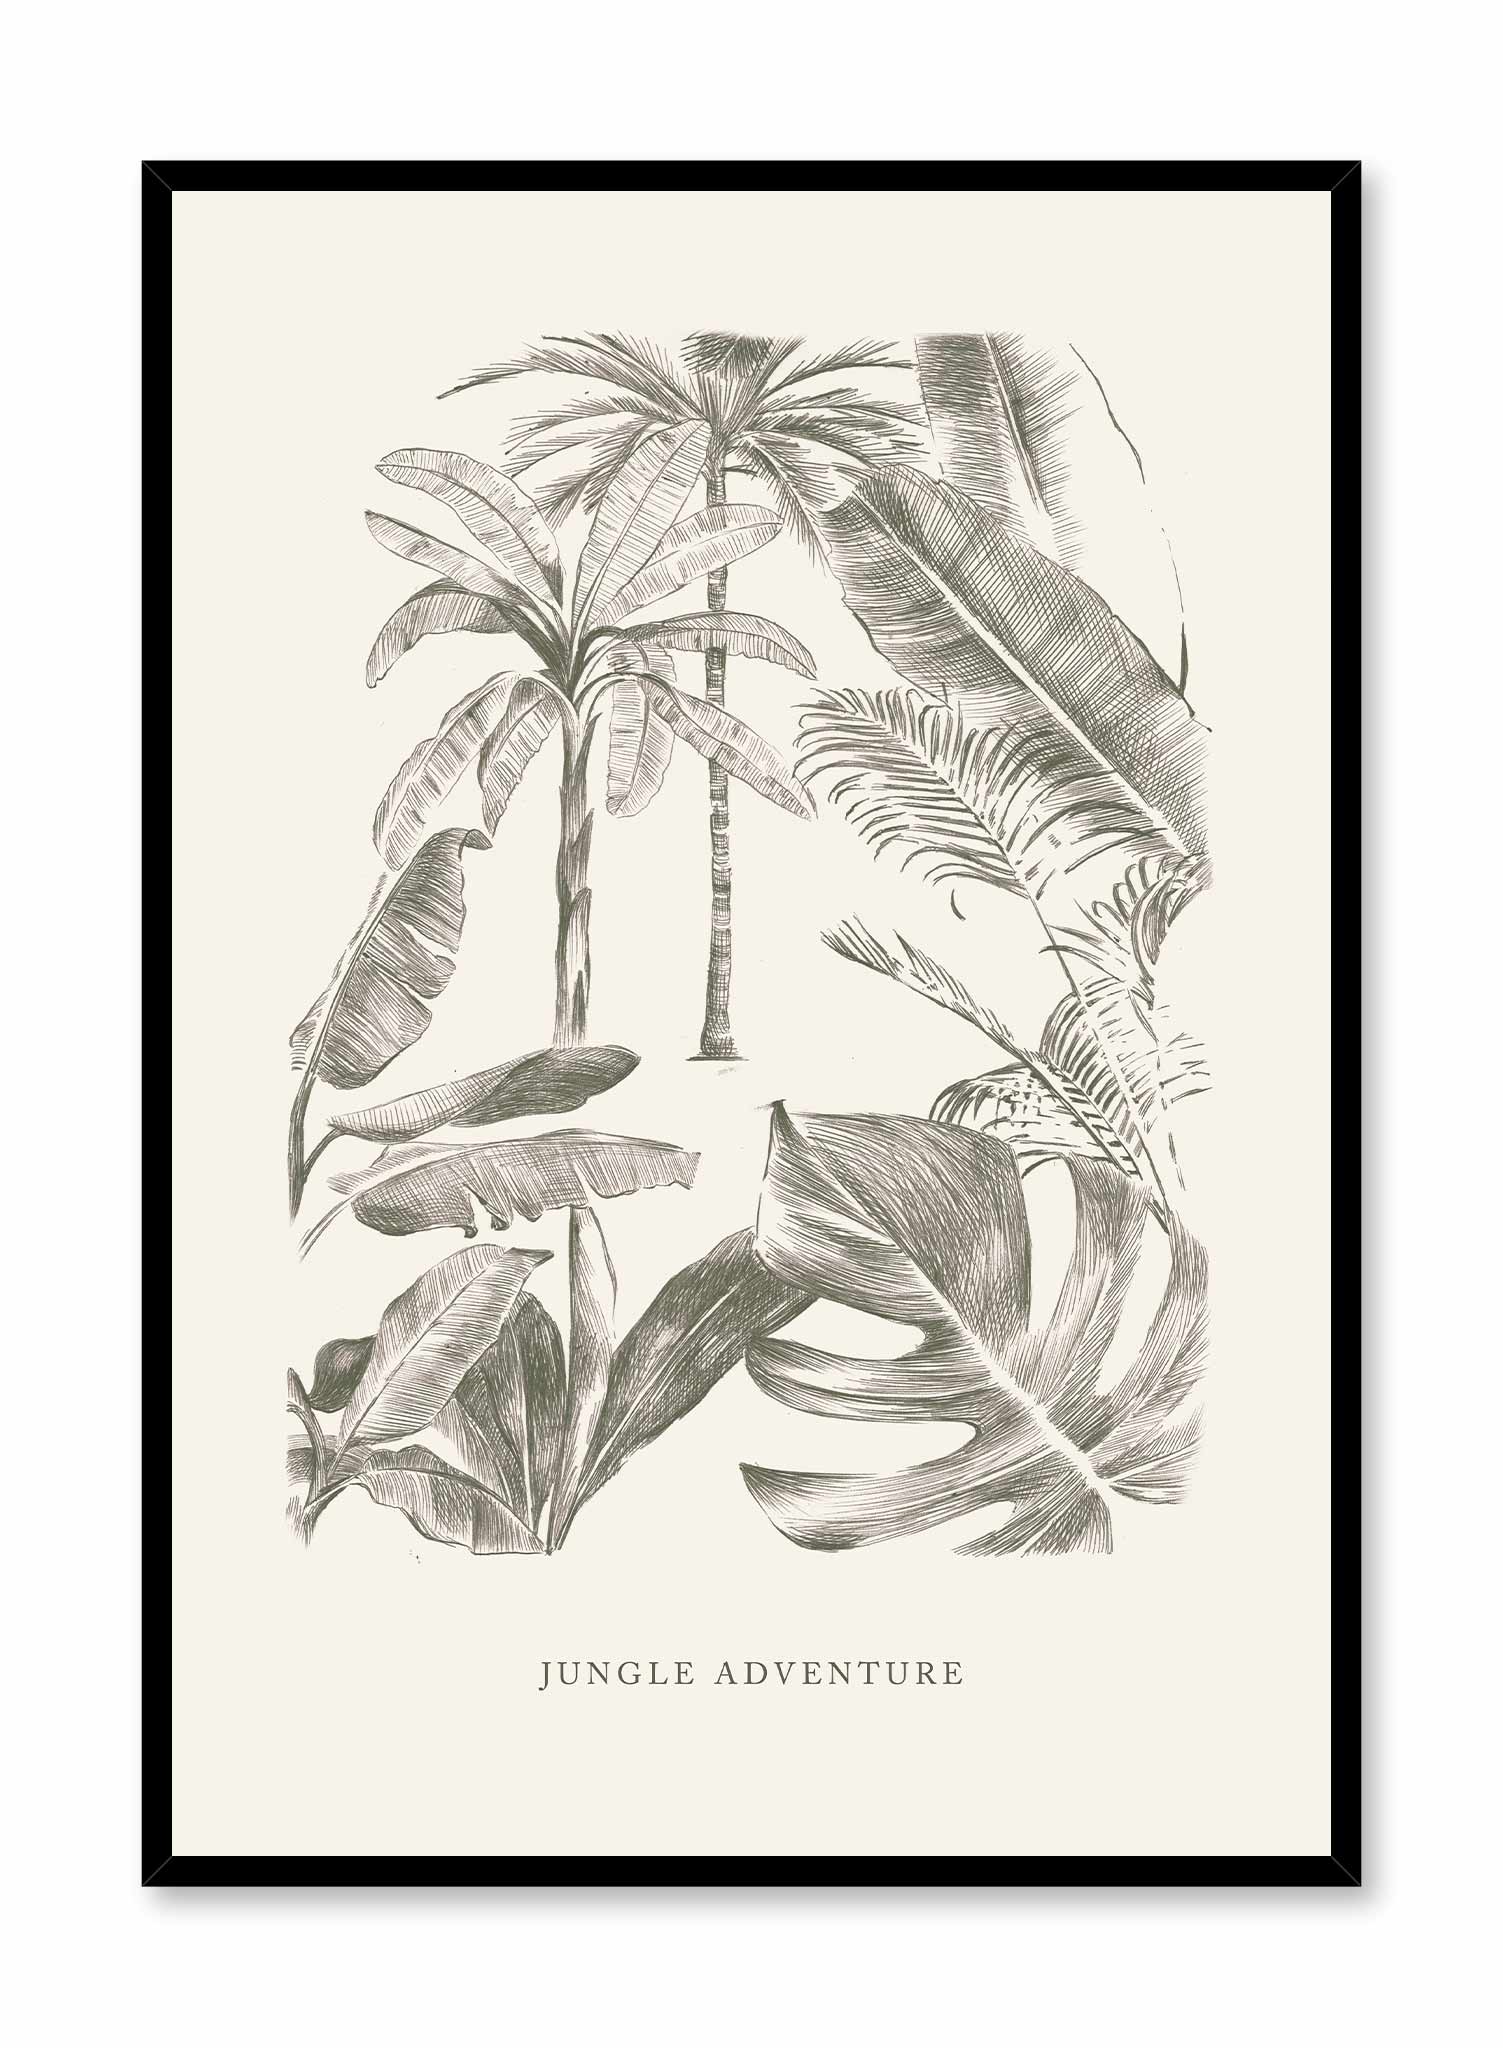 Jungle Adventure is a minimalist illustration of a collection of plants inviting the observer into the jungle accompanied with the words "Jungle Adventure" at the bottom by Opposite Wall.